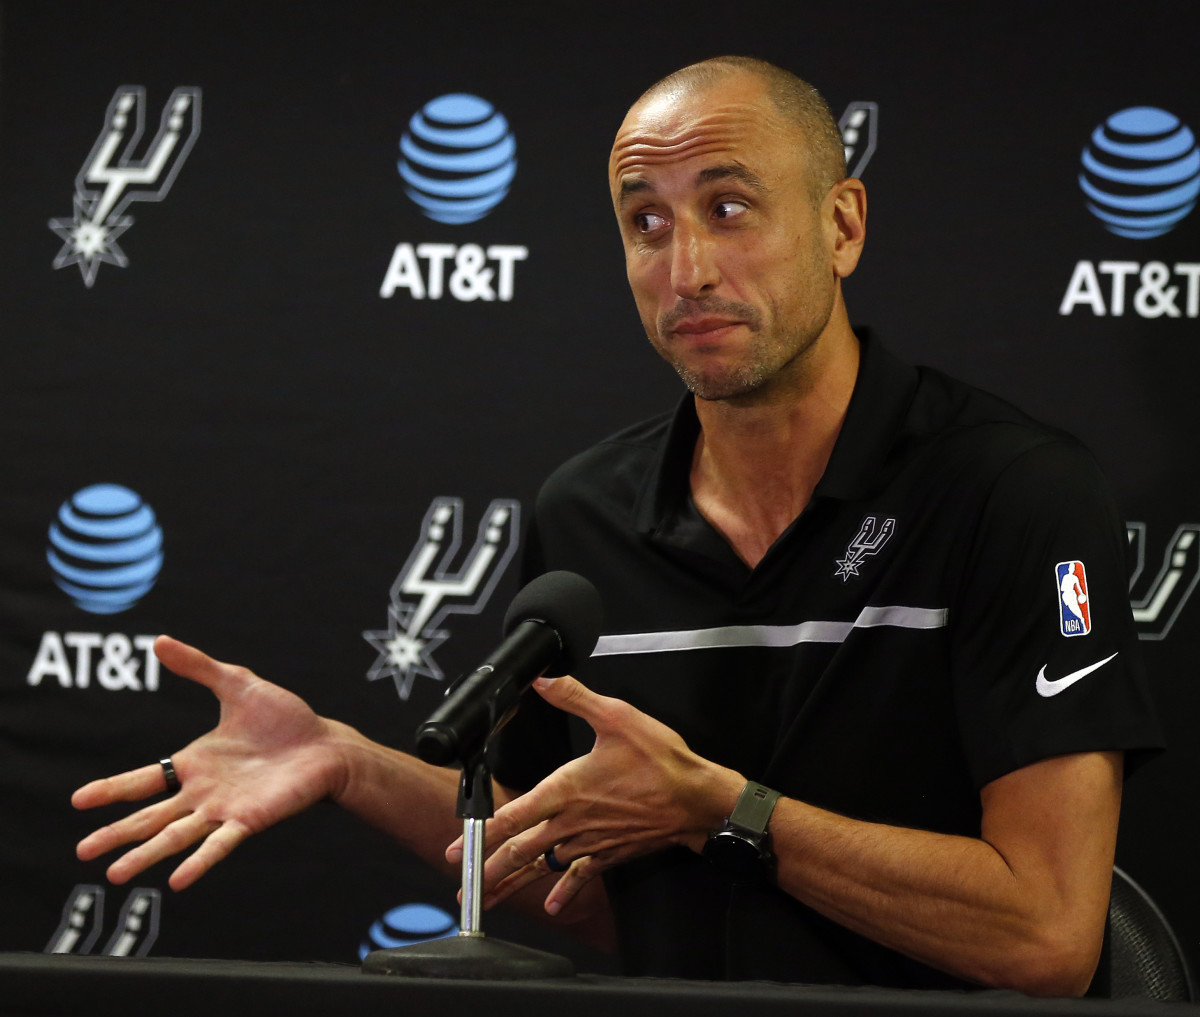 Former San Antonio Spurs guard Manu Ginobili during a press conference after the NBA announced he would be inducted into the Naismith Memorial Basketball Hall of Fame.